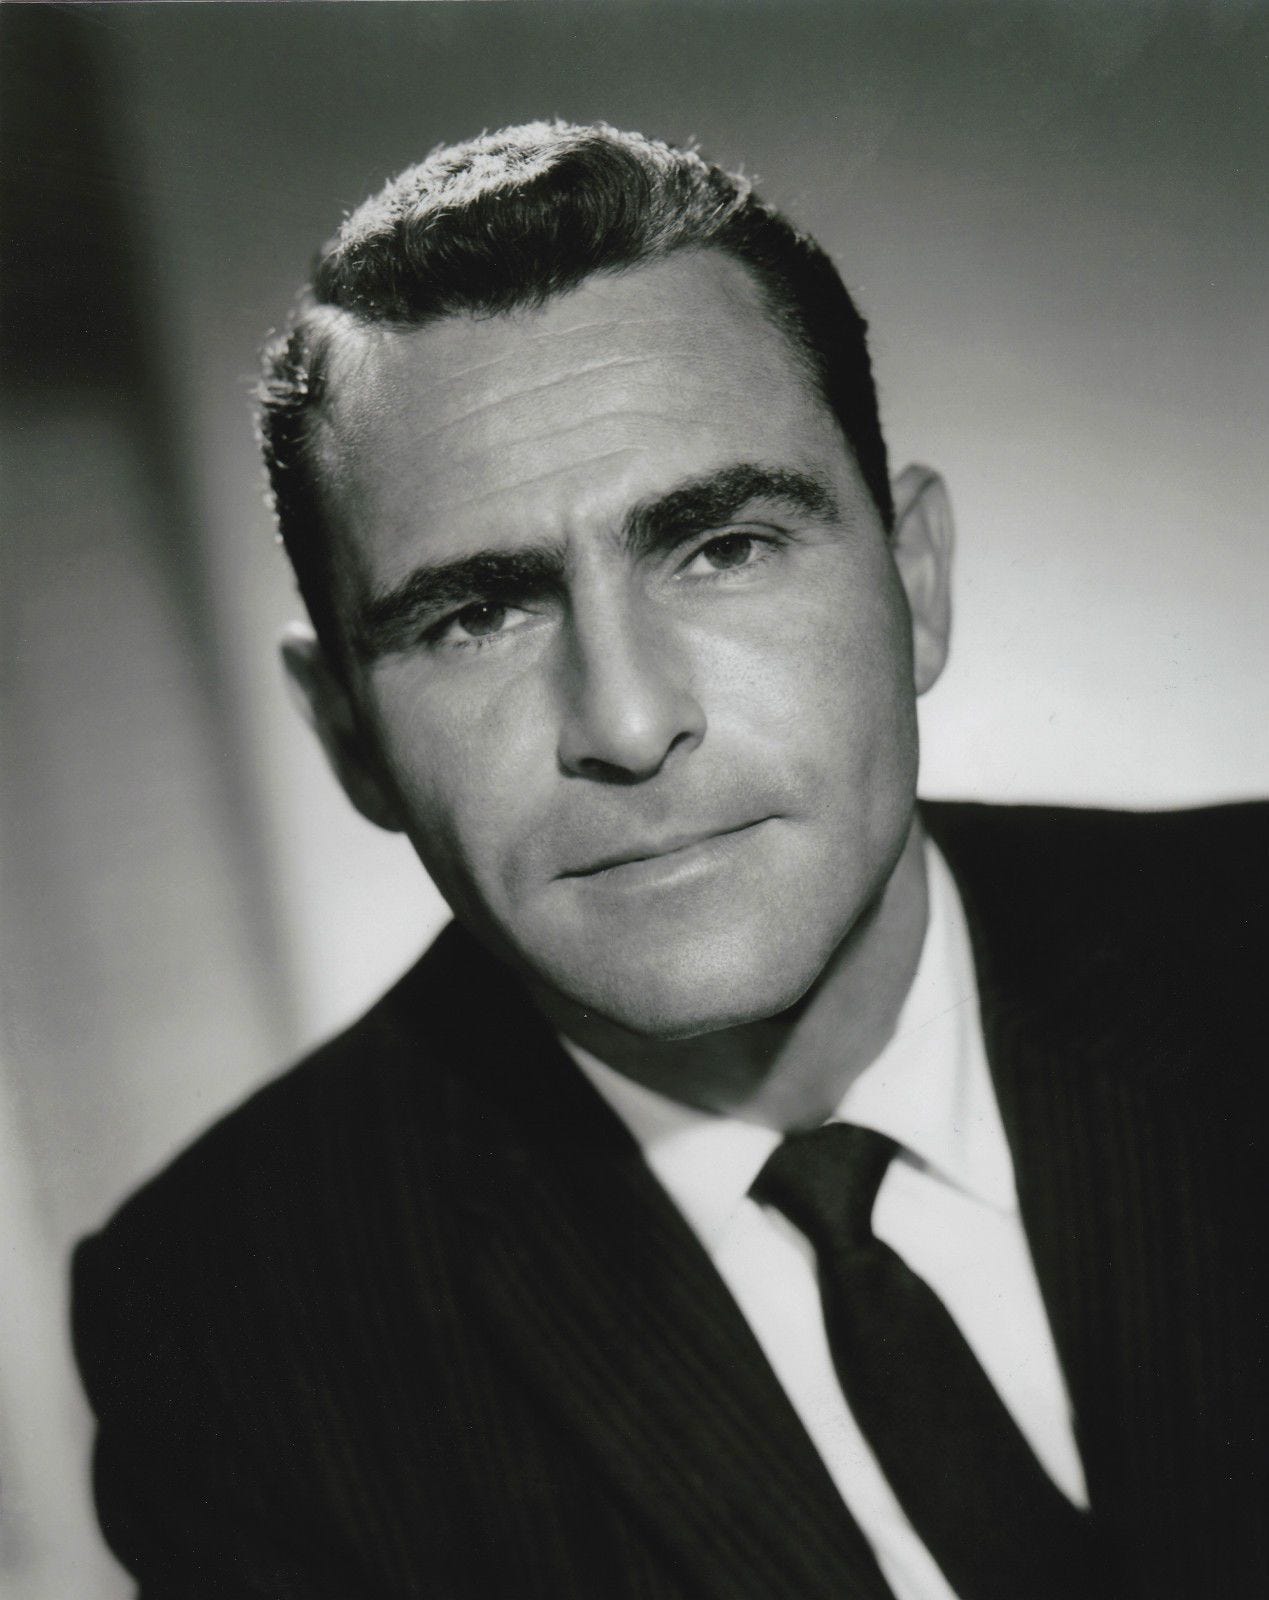 Rod Serling | Biography, TV Shows, & Facts | Britannica